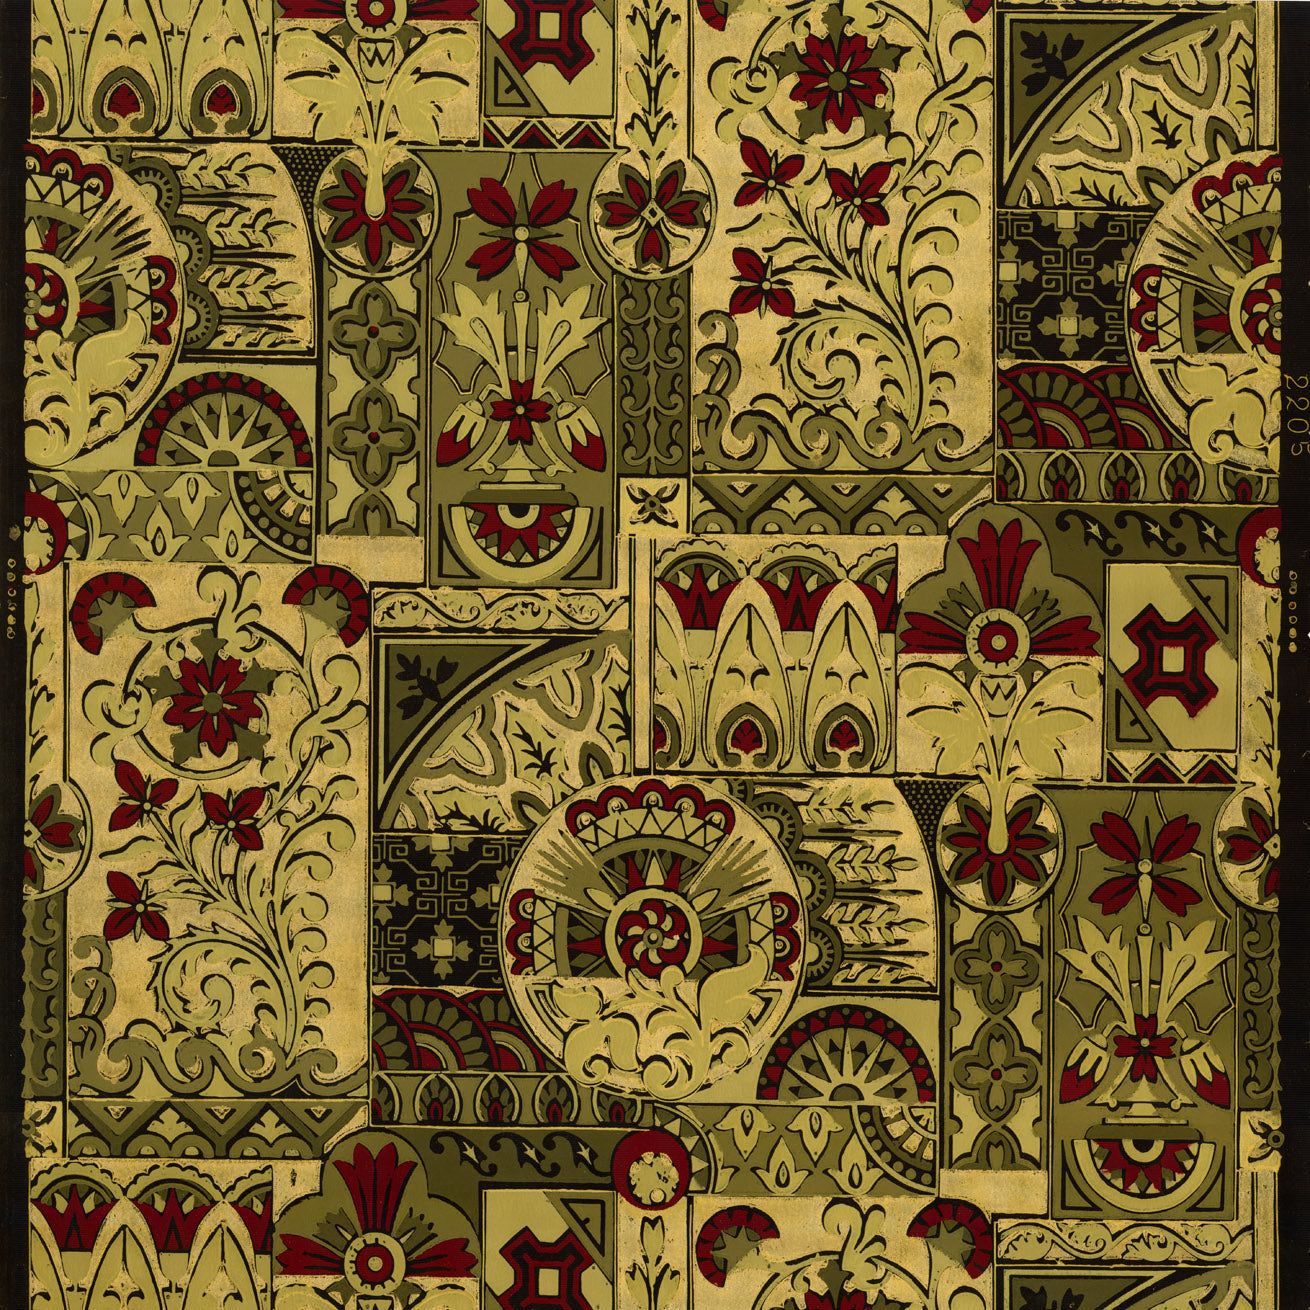 A pattern of square tiles in black, red, and gold, featuring a variety of floral and geometric shapes. - Gothic